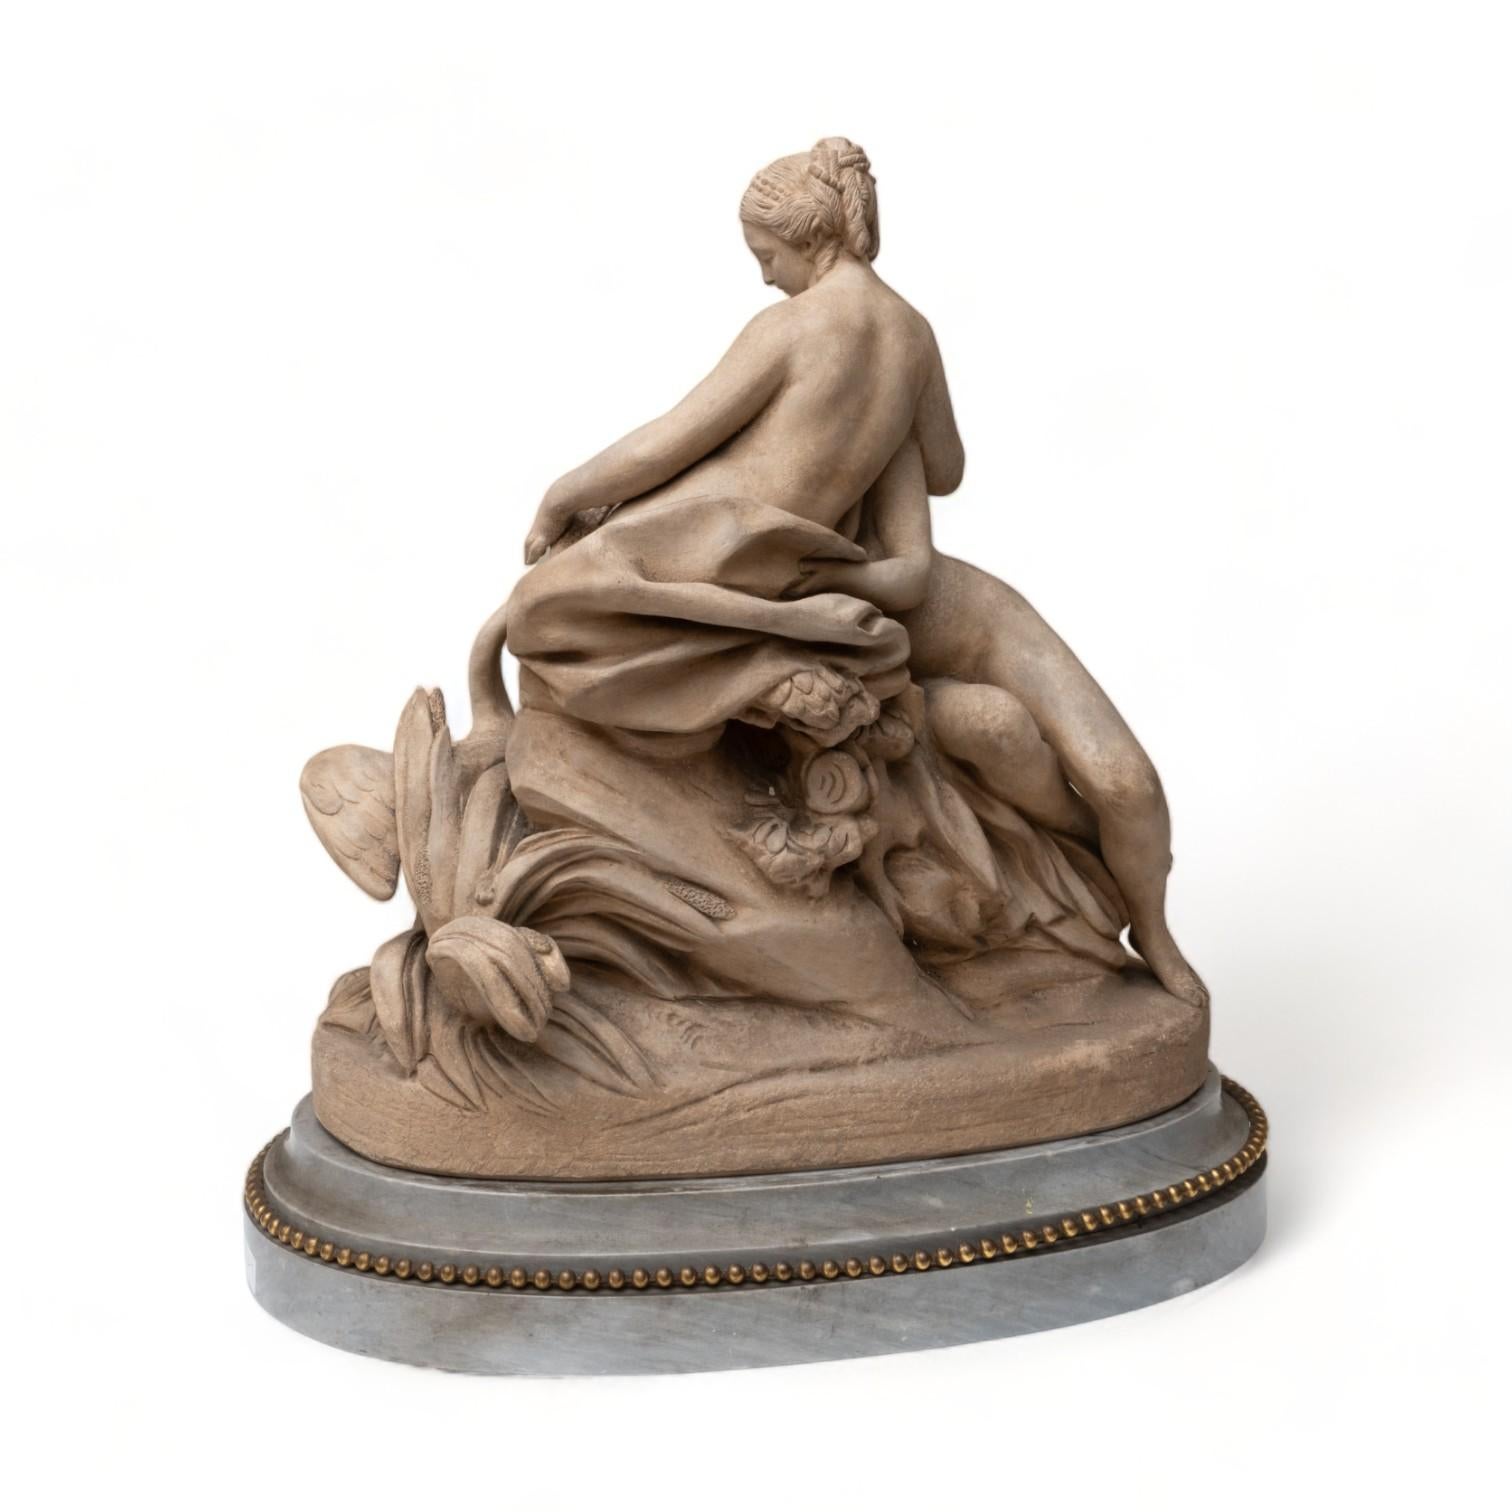 Marble Base with Bronze Beading late 18th or early 19th century

Provenance Hotel Drouot and Authentication by Le Calvez